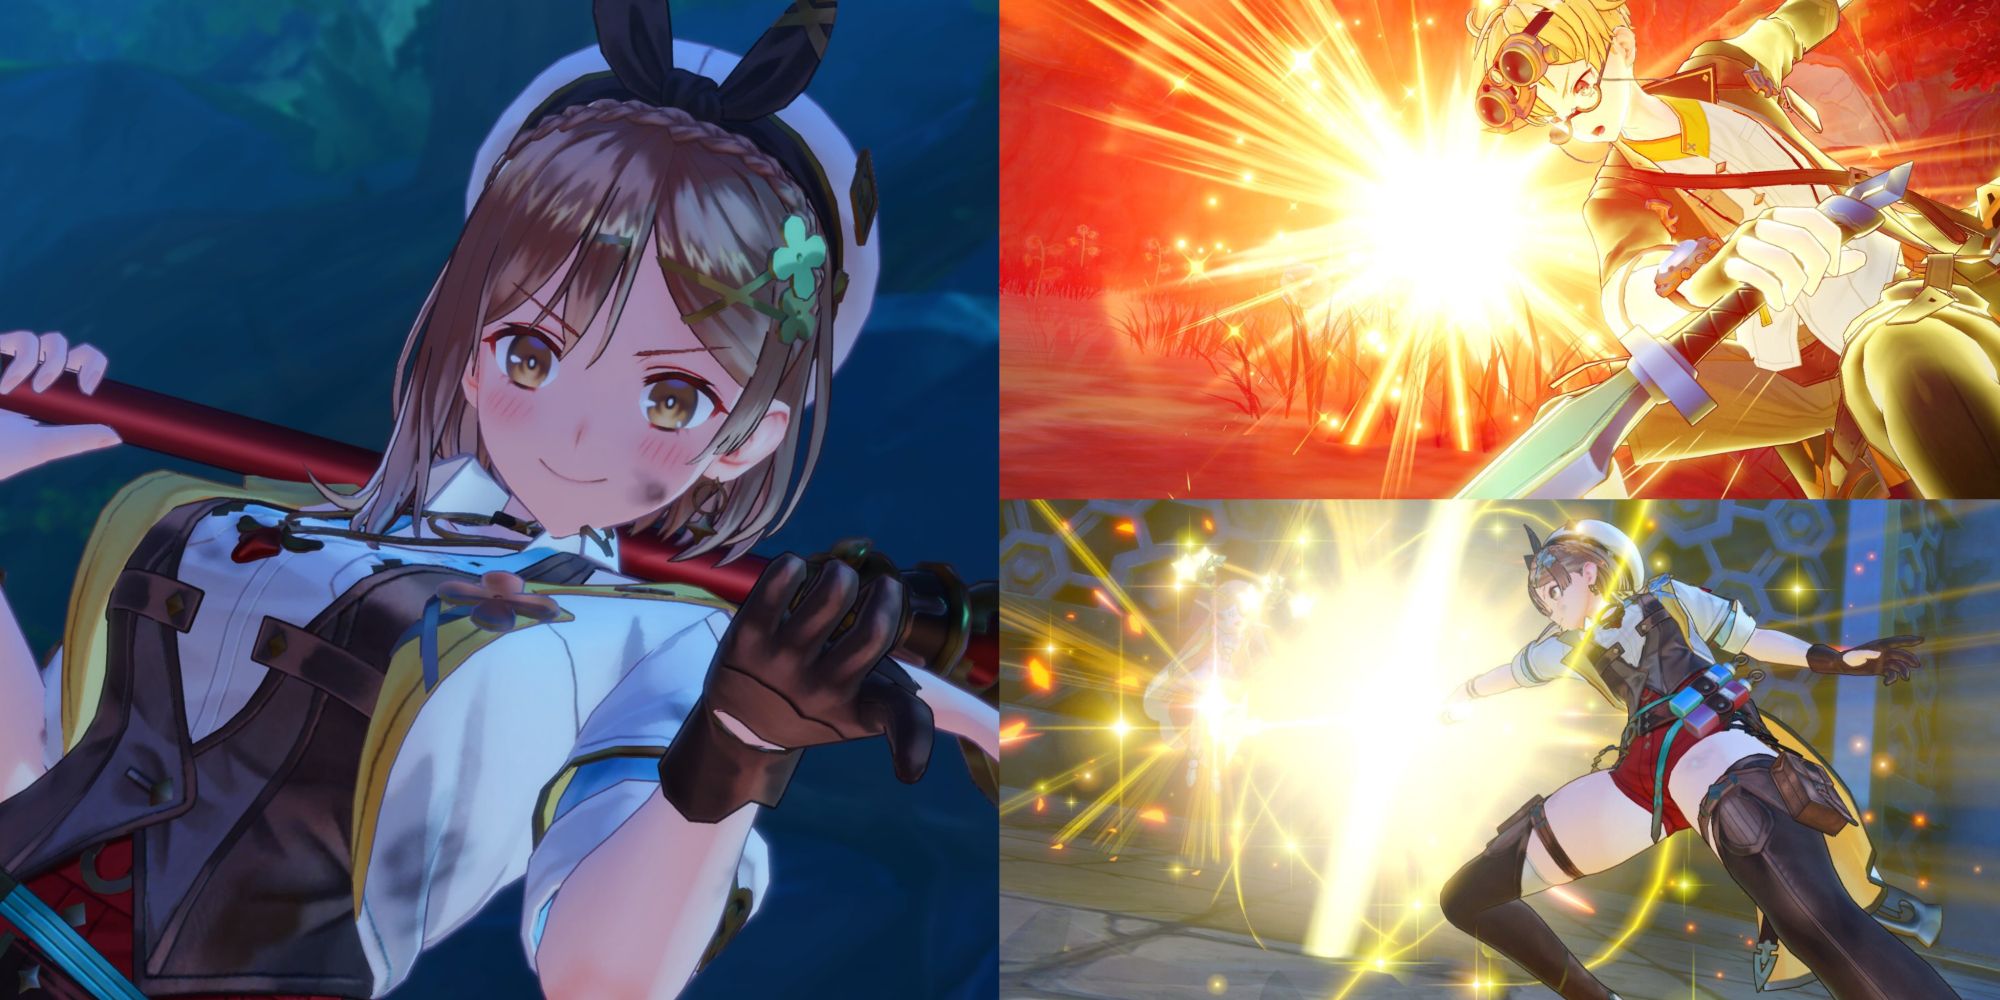 A collage of images from Atelier Ryza 3: Alchemist of the End & the Secret Key. The leftmost image is a bruised and dirty Ryza posing after achieving victory in combat. The top right is Tao performing a devastating slash with his Dual Daggers. The bottom right is Ryza performing a powerful attack with her Staff.